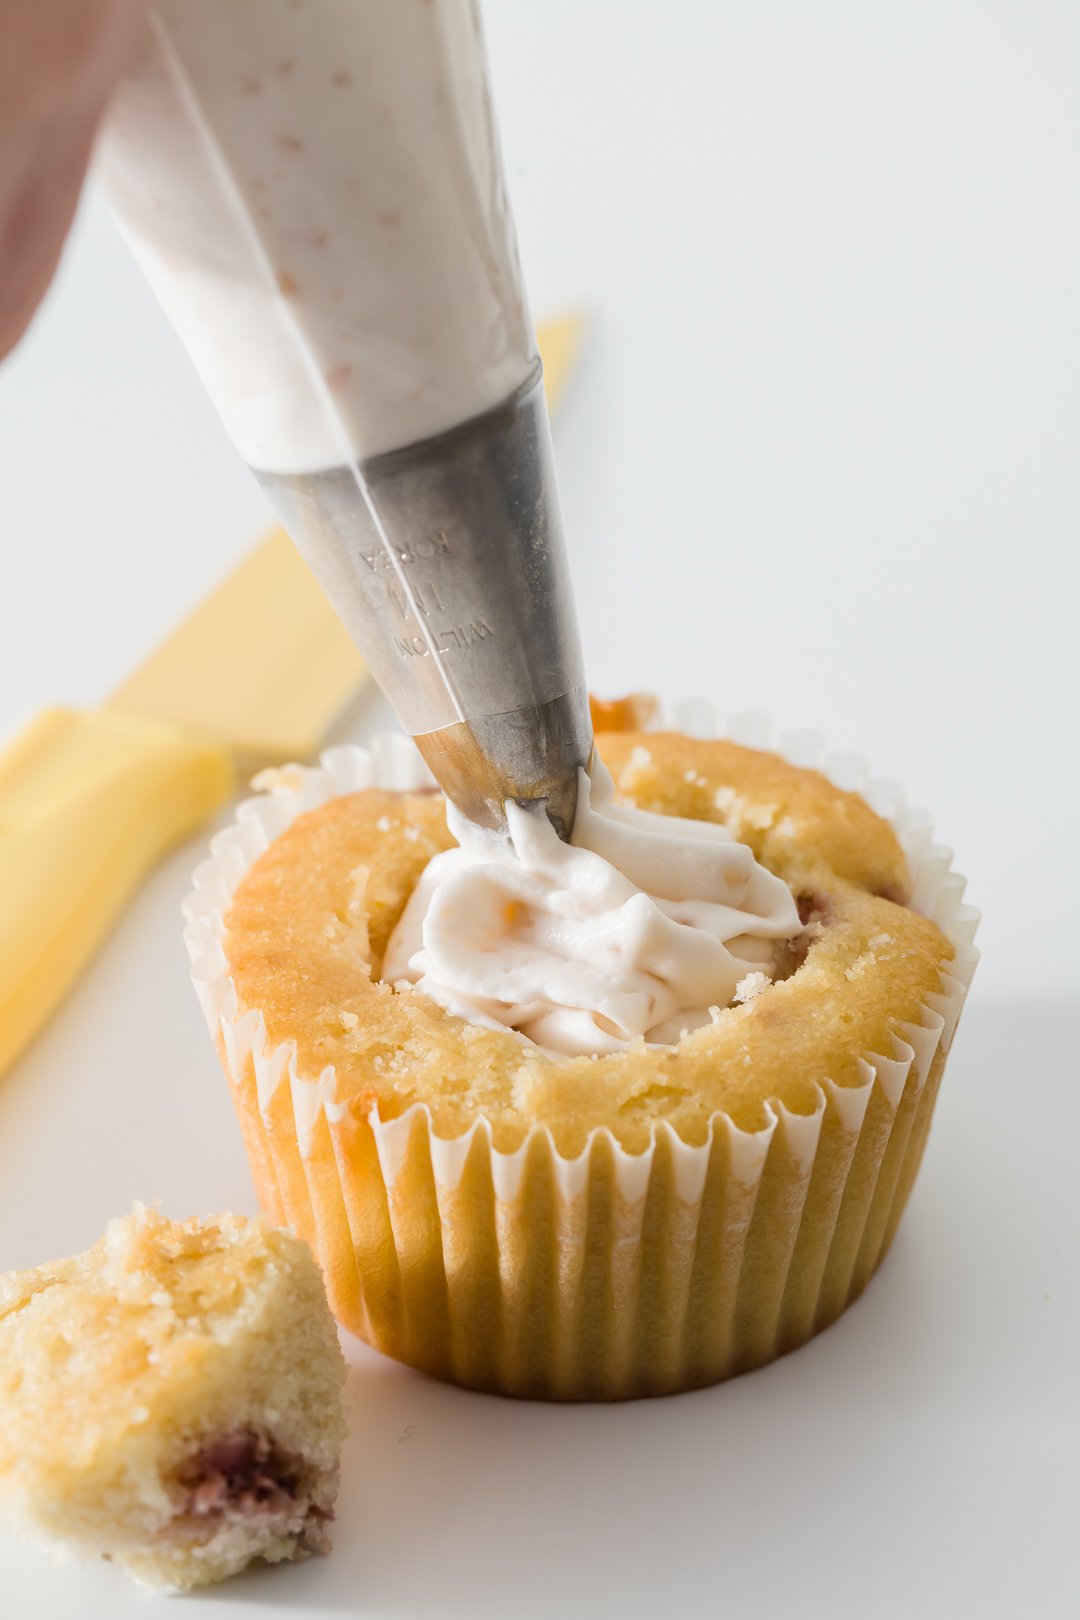 Filling a cupcake with a piping bag